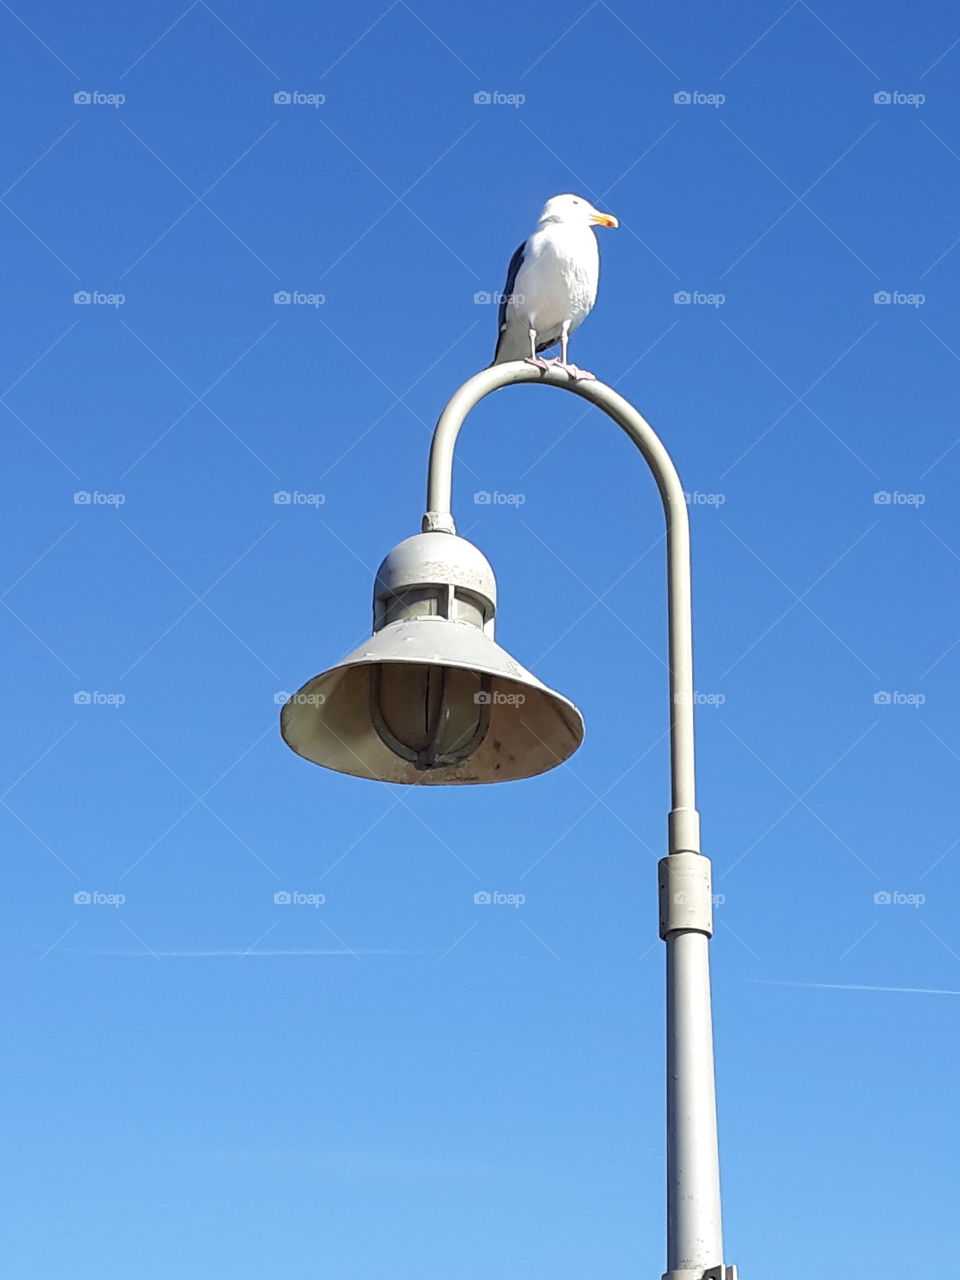 I wanted to focus on the bird on top of the lamppost, and so, having no distractions in the background, except for the sky, created a canvas to which the sky, bird, and lamp are the main focuses